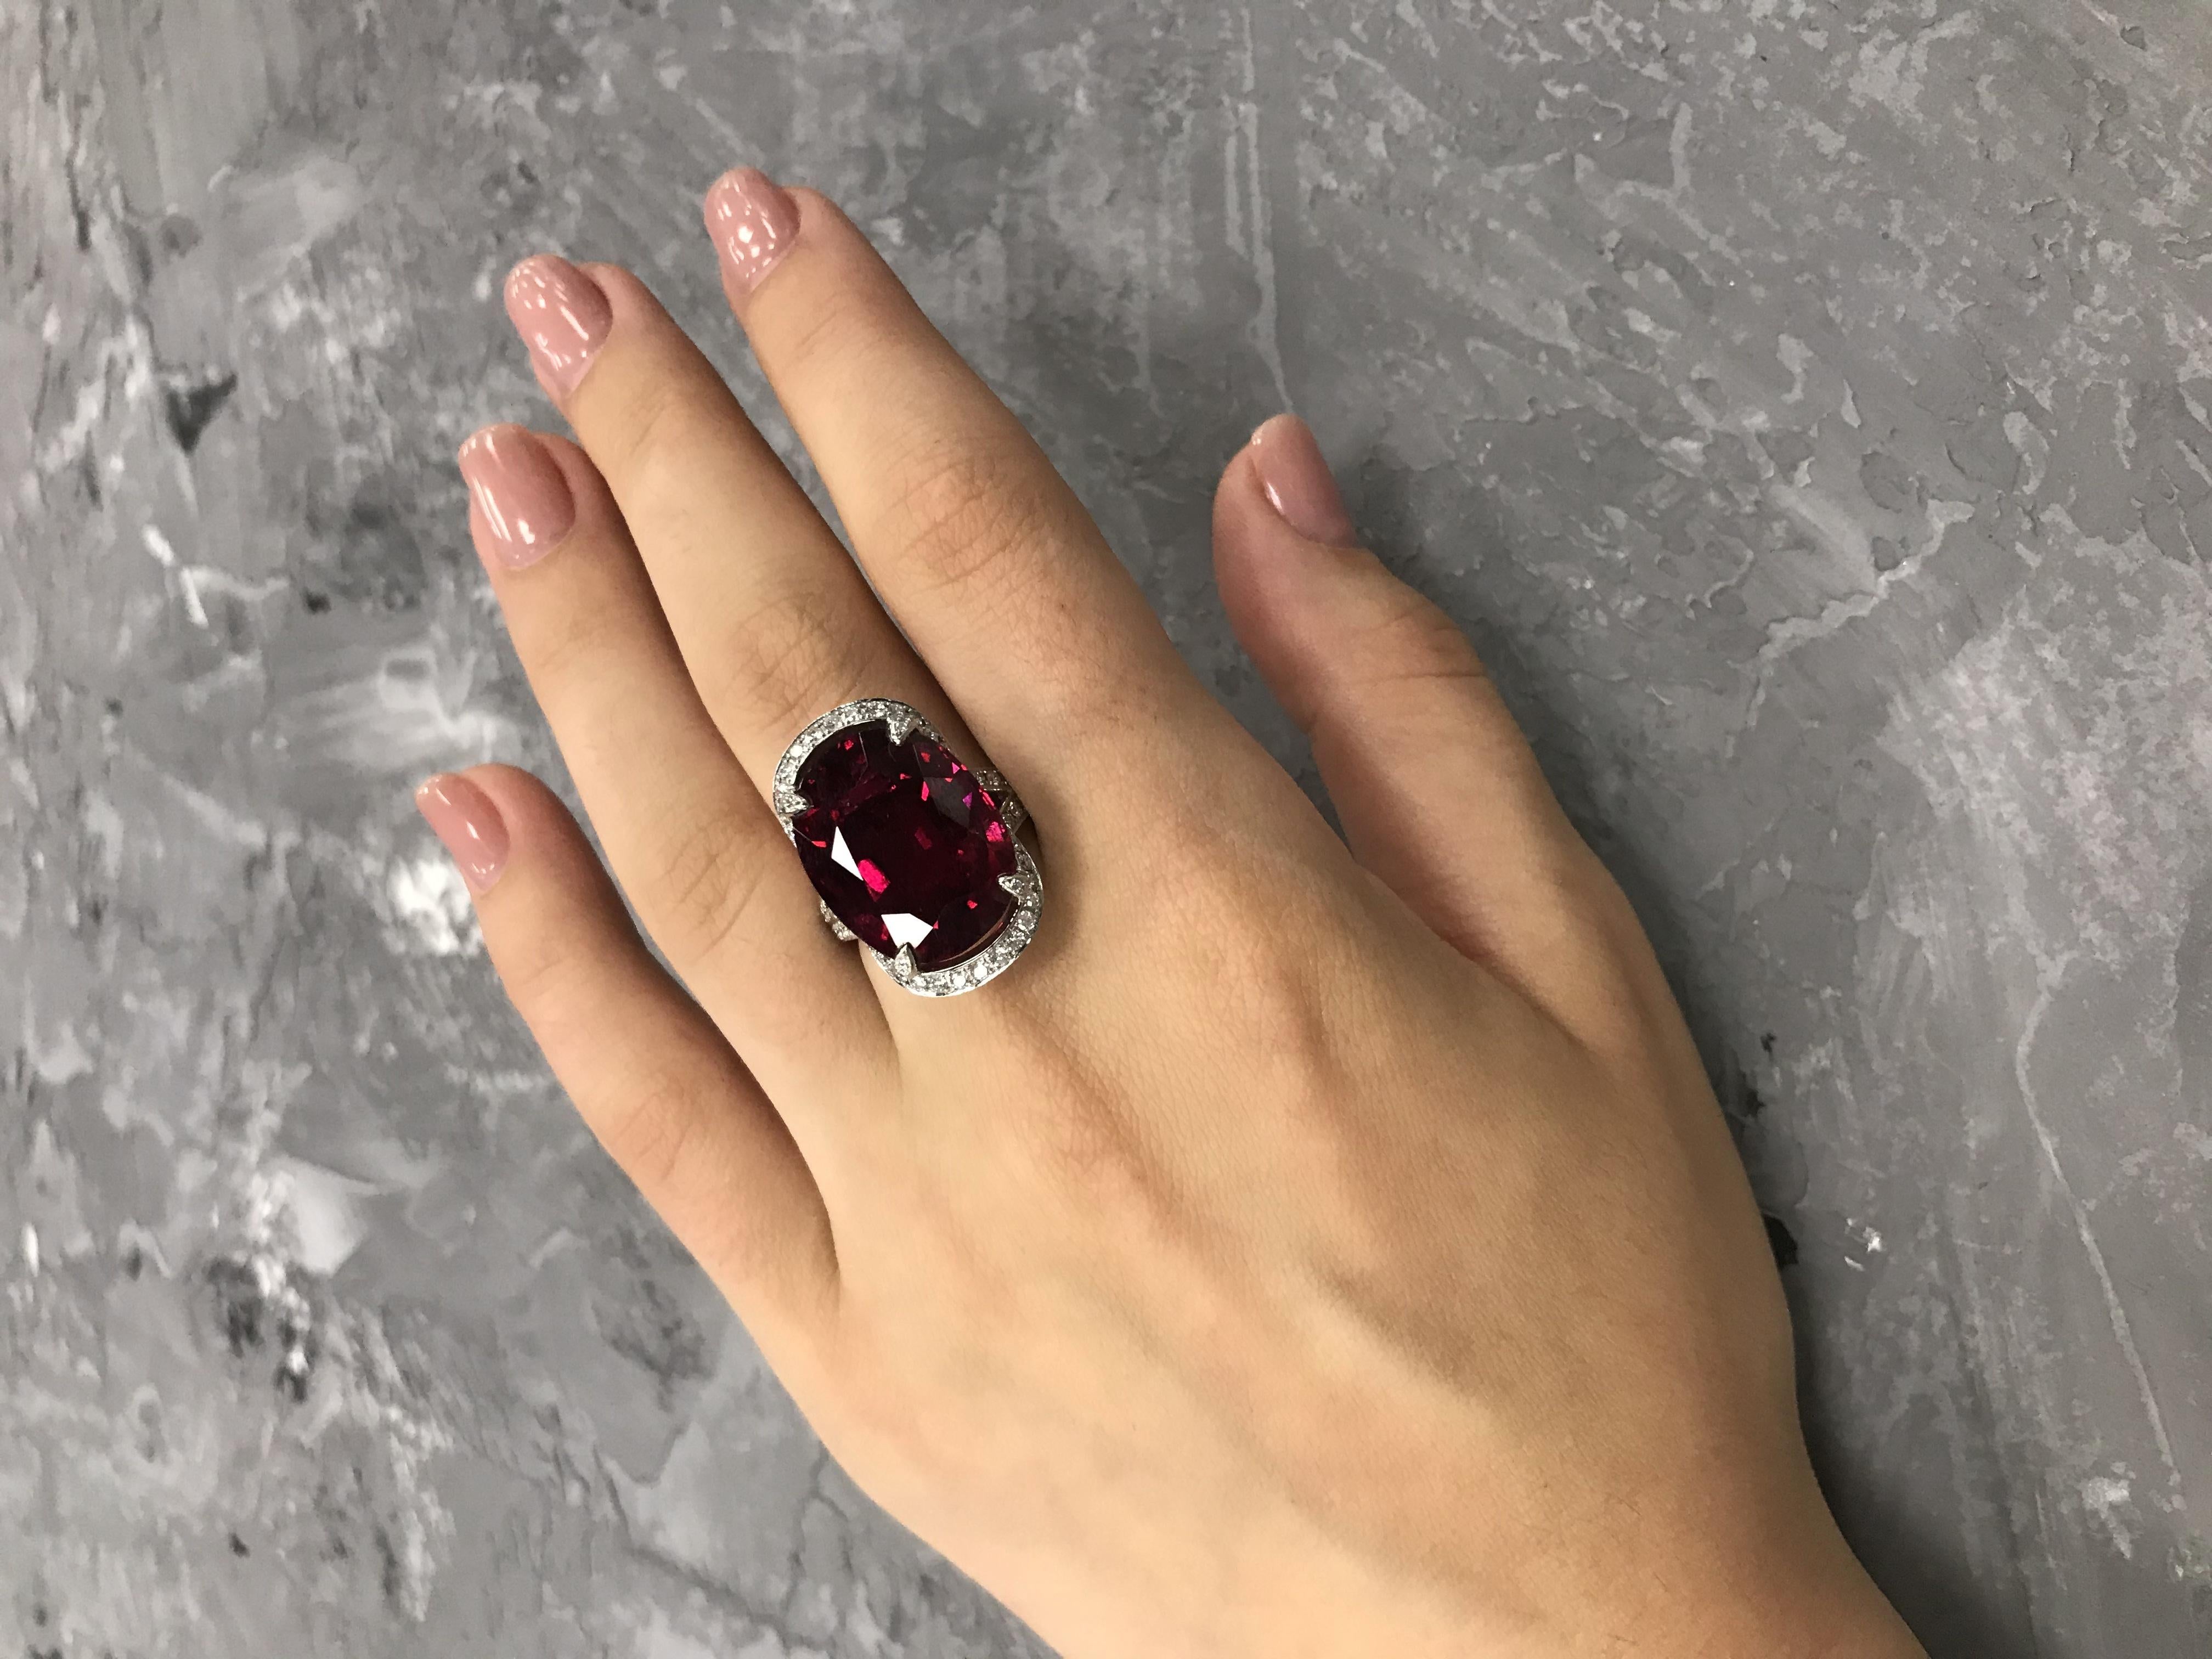 Ring White Gold 18 K
Diamond 82-RND-0,99-F/VVS1A 
Diamond 12-RND-0,05-G/VVS1A
Garnet 1-17,95ct 
Weight 11,04 gram
Size 17

With a heritage of ancient fine Swiss jewelry traditions, NATKINA is a Geneva based jewellery brand, which creates modern